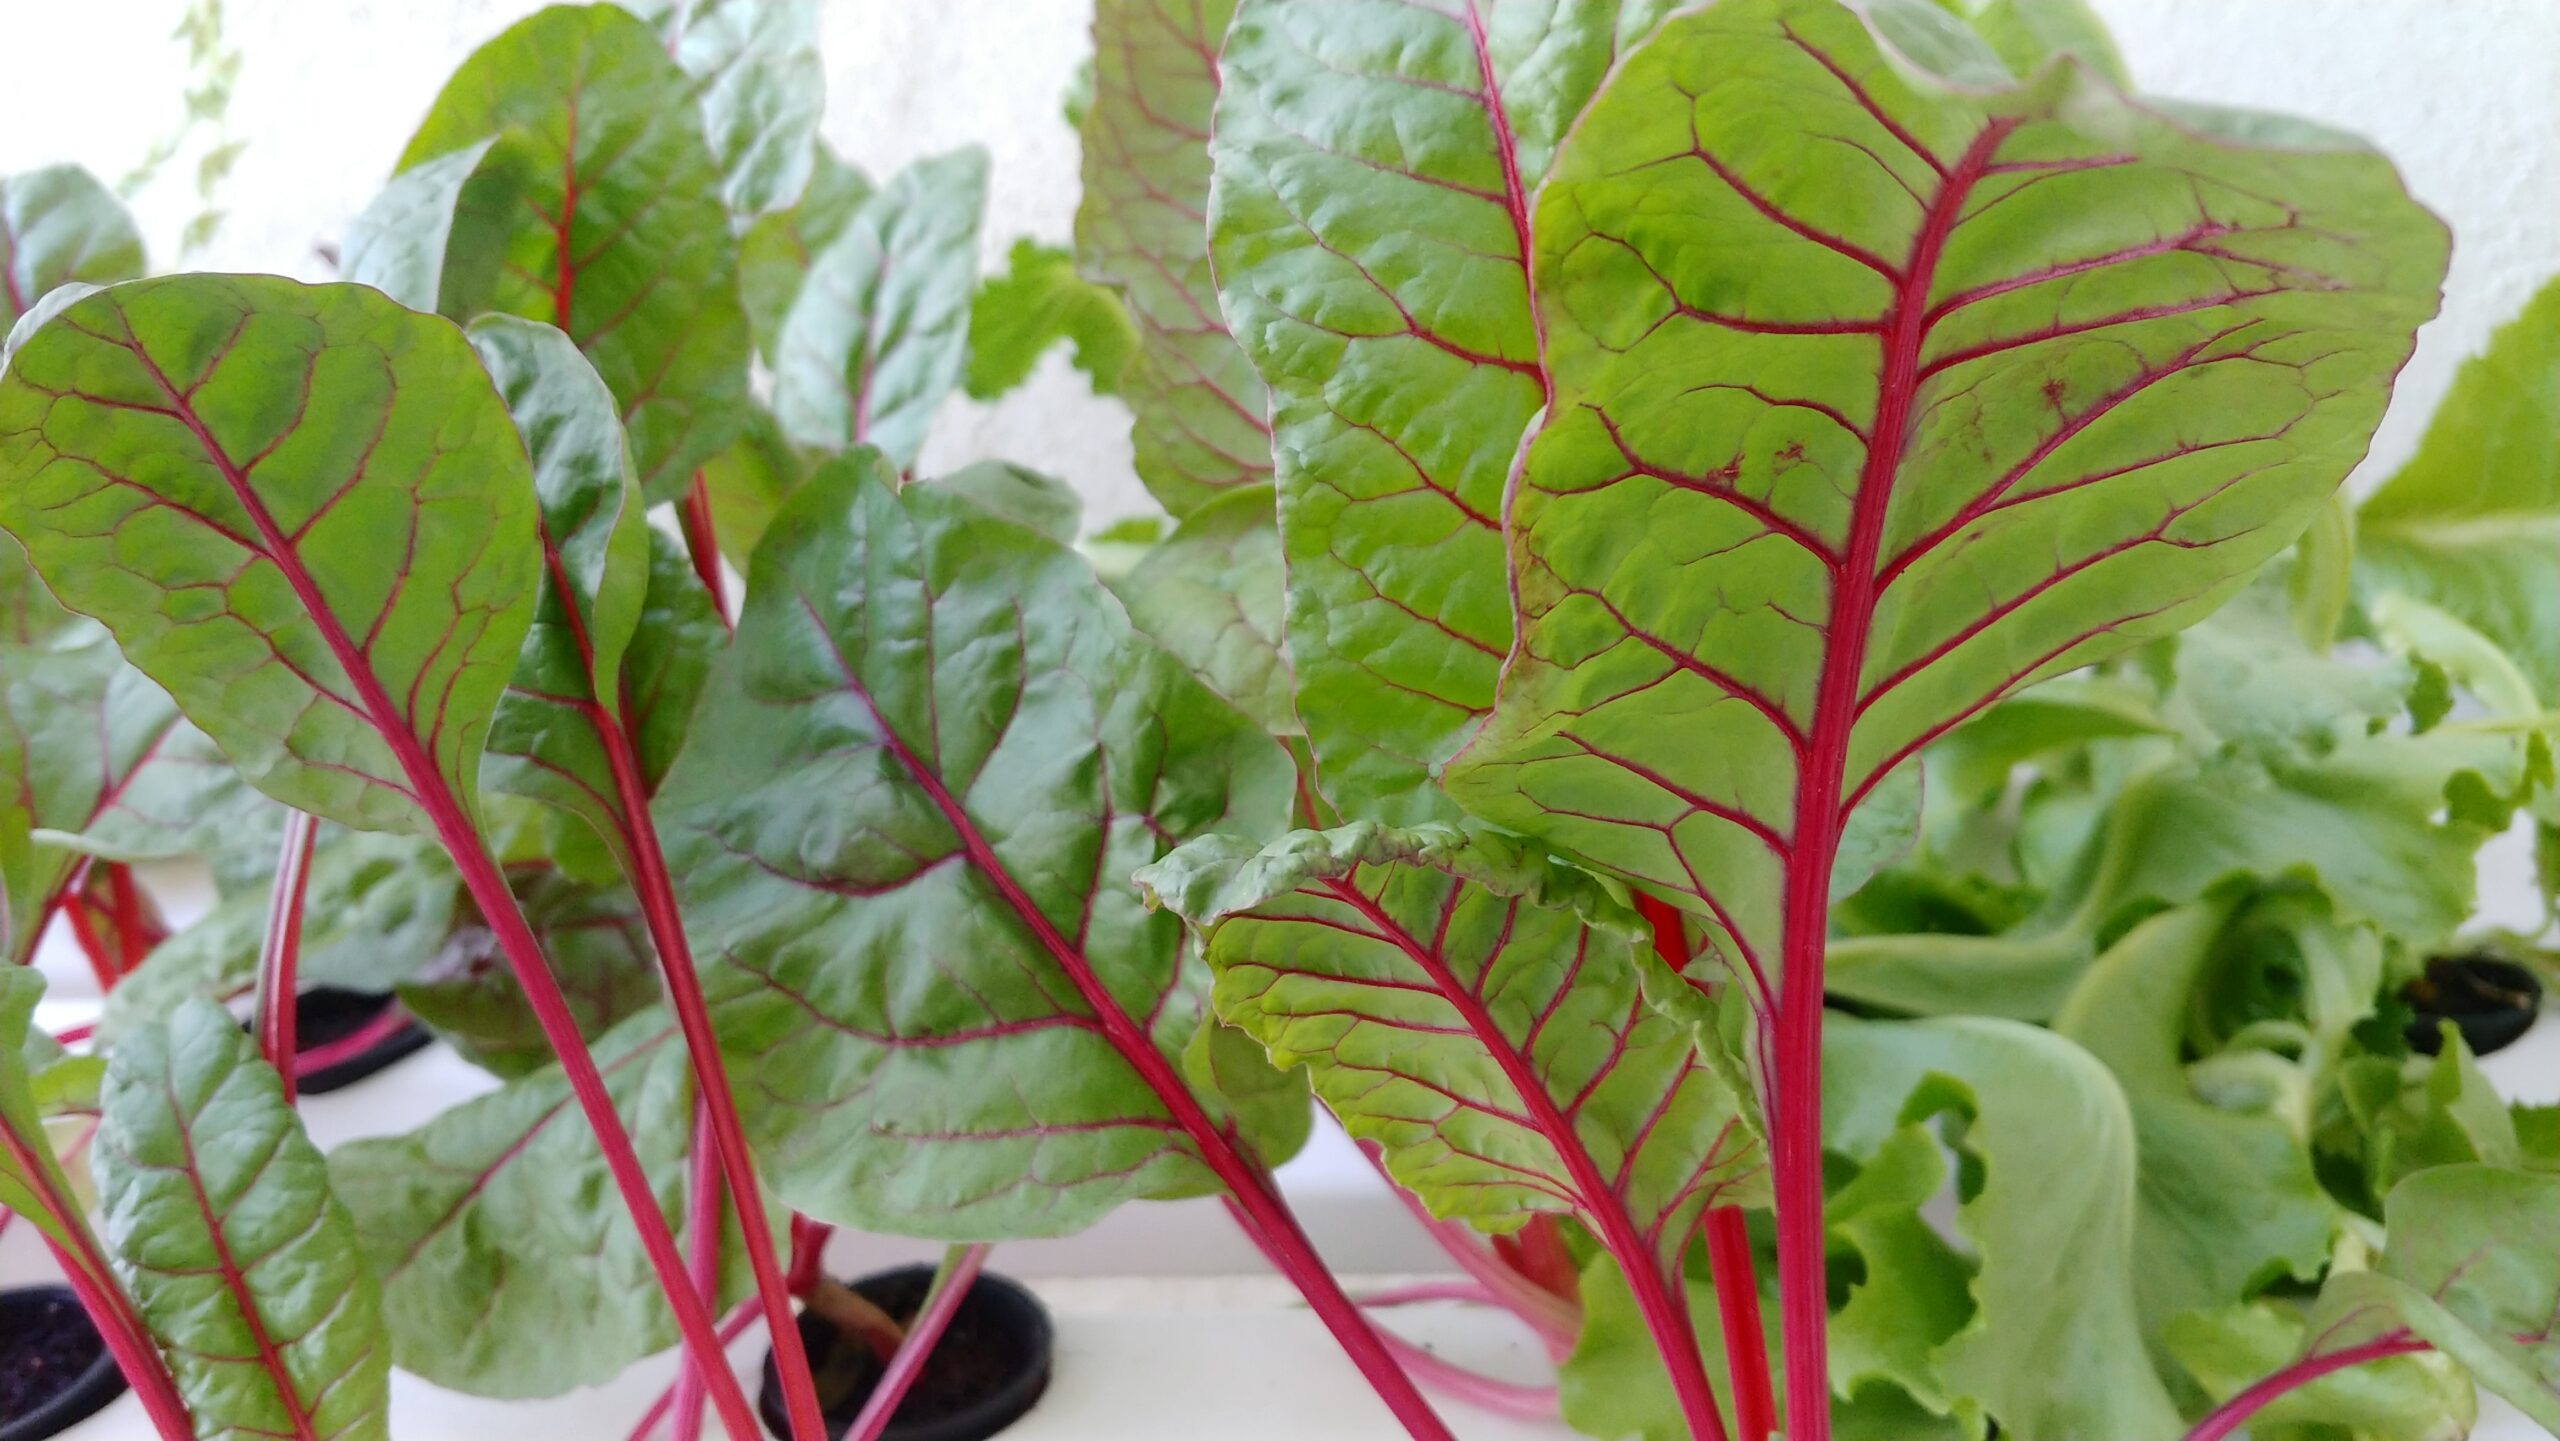 Hydroponic vegetables are low maintenance and easy for beginners